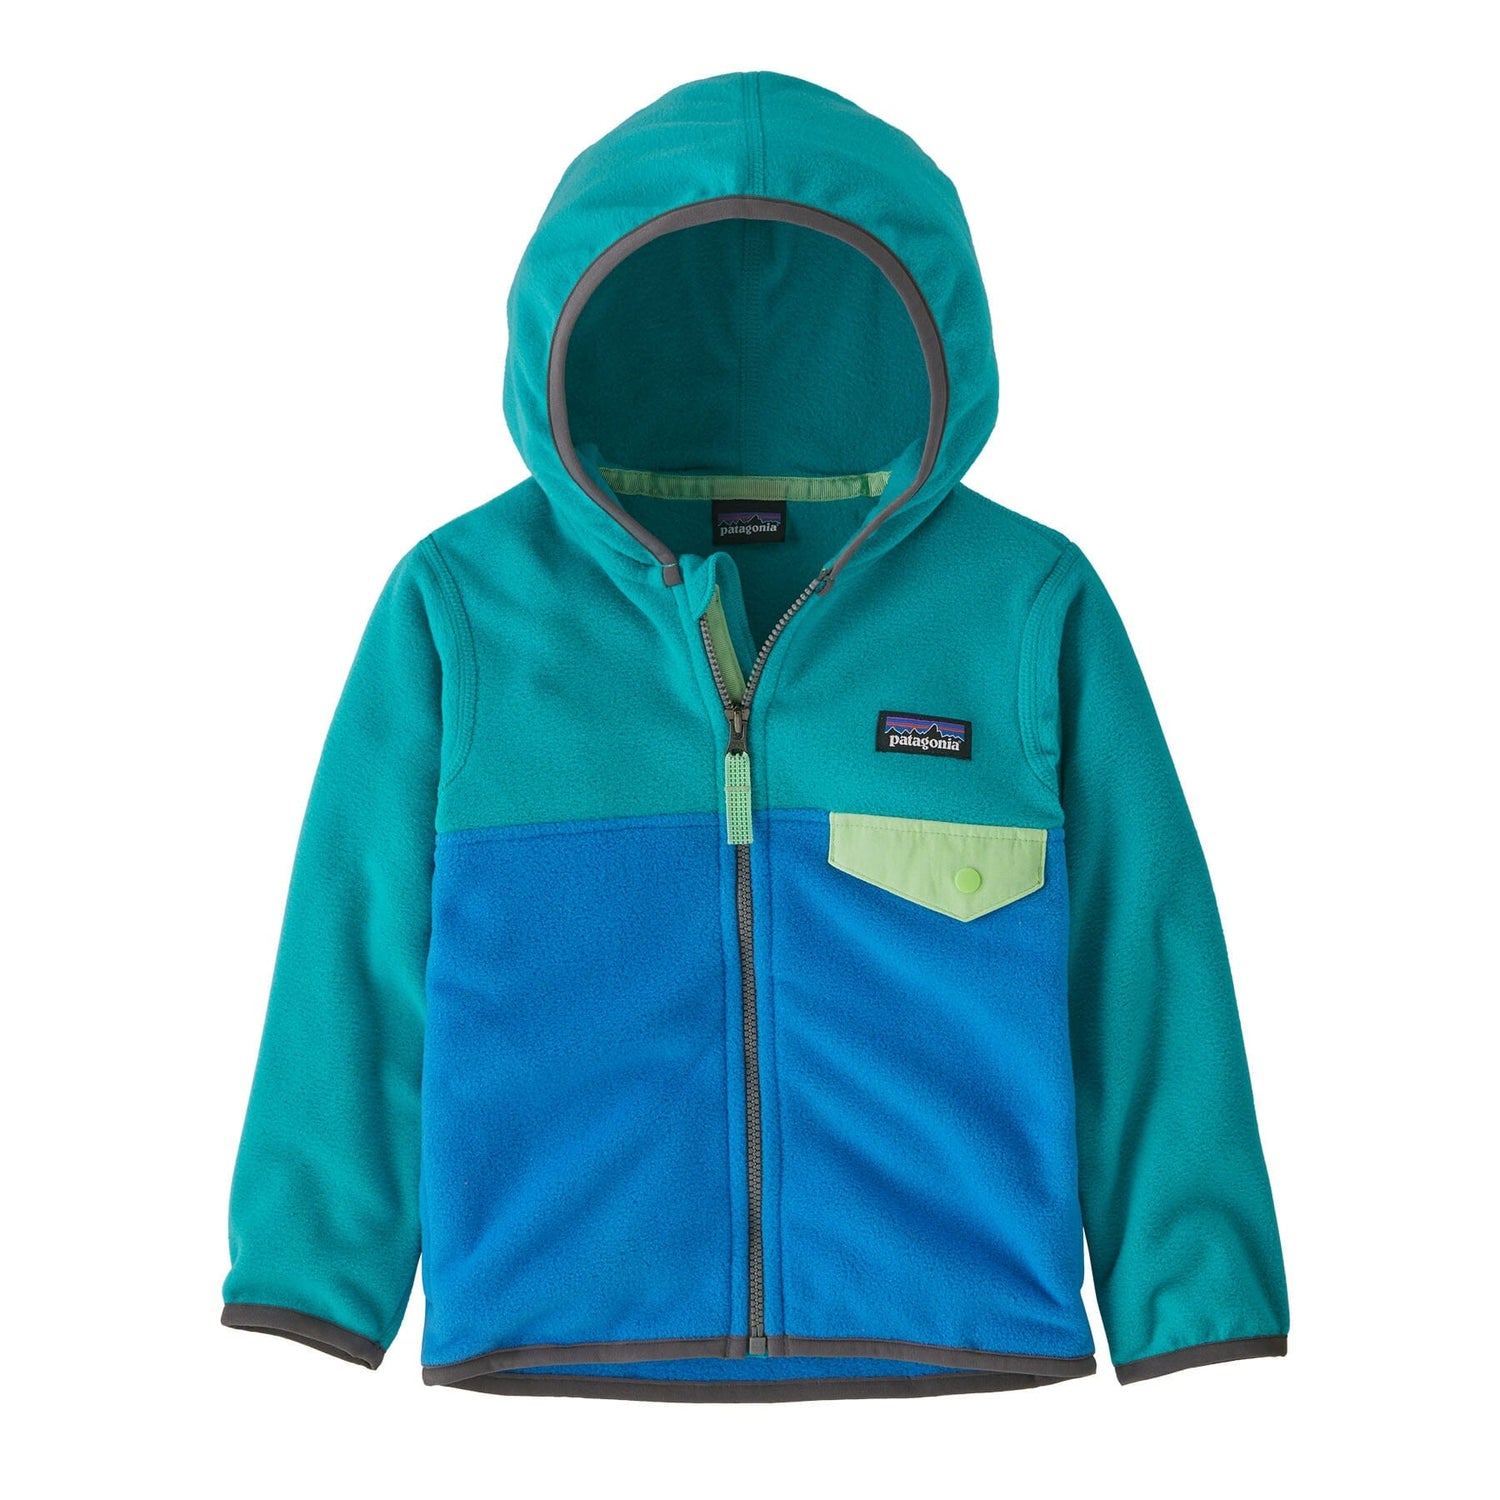 Patagonia Kids Micro D Snap-T Fleece Jkt - 100% recycled polyester Vessel Blue Shirt